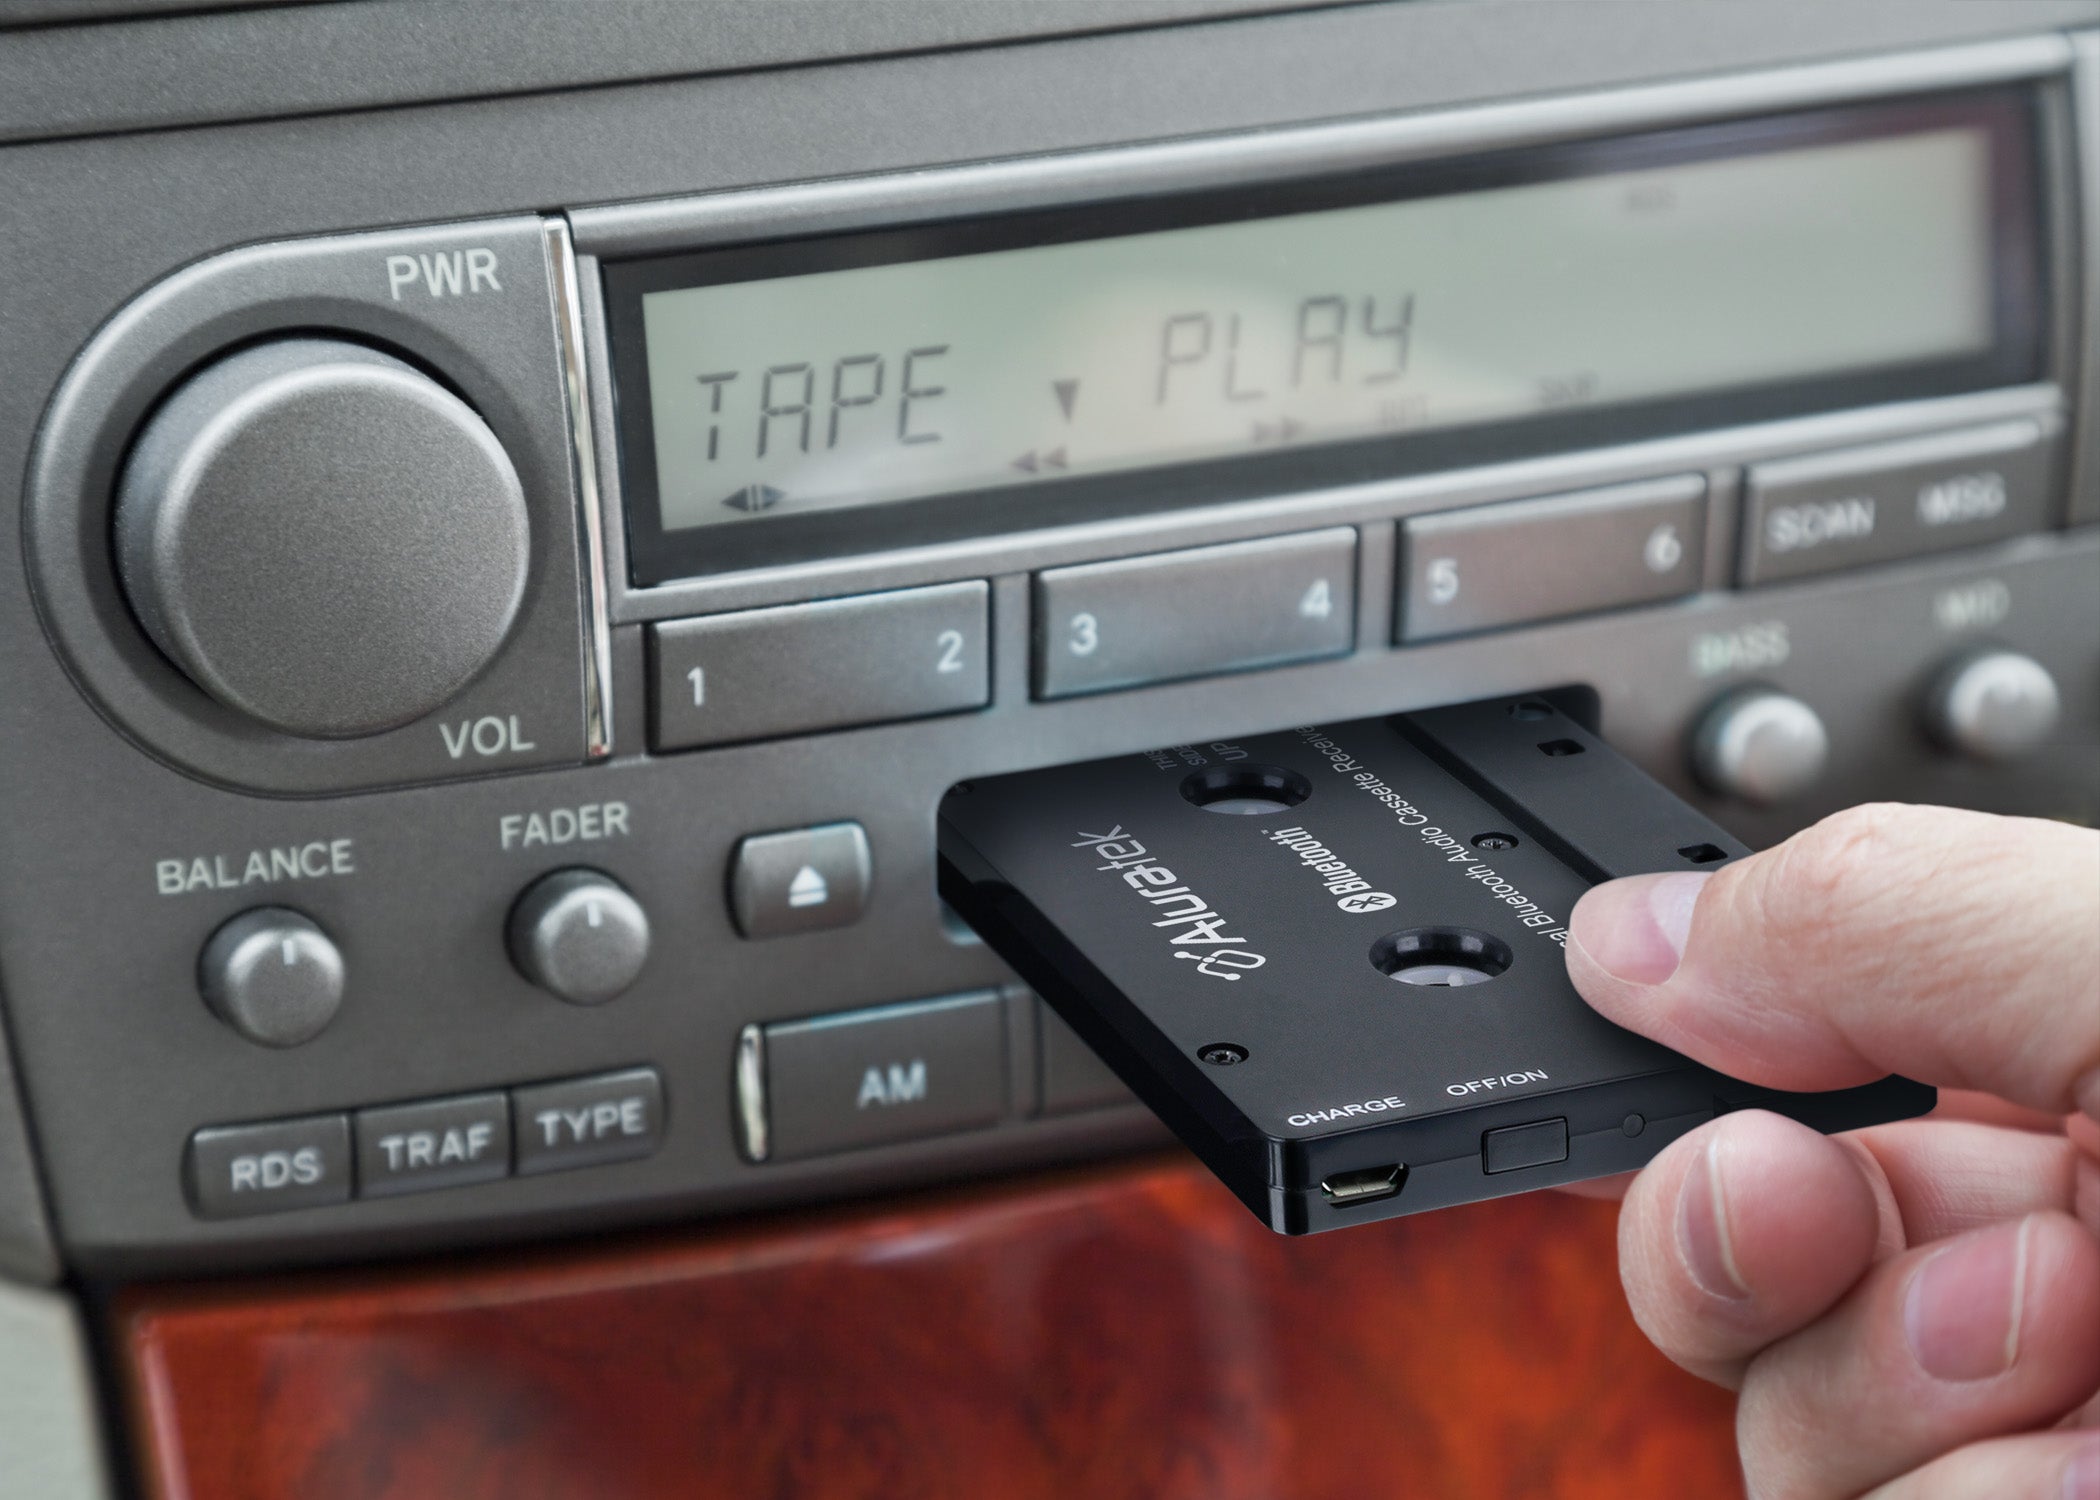 How to Fix a Car Audio Cassette Adapter 